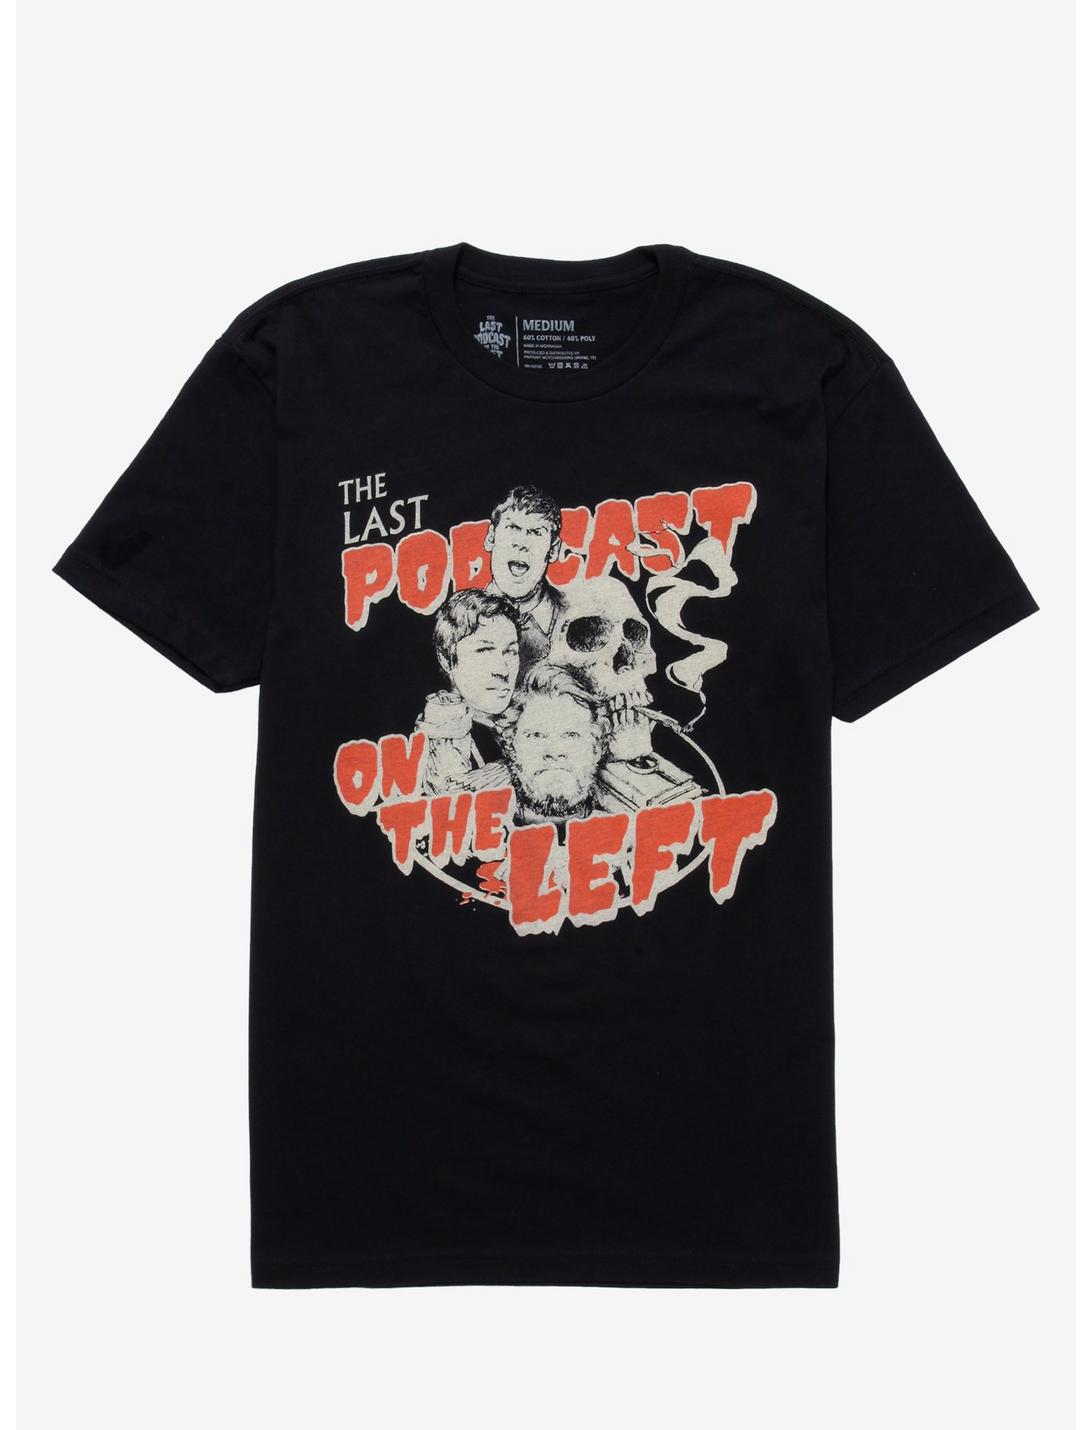 Fourlef The Last Podcast On The Left Tour 2019 10 Tee Shirt